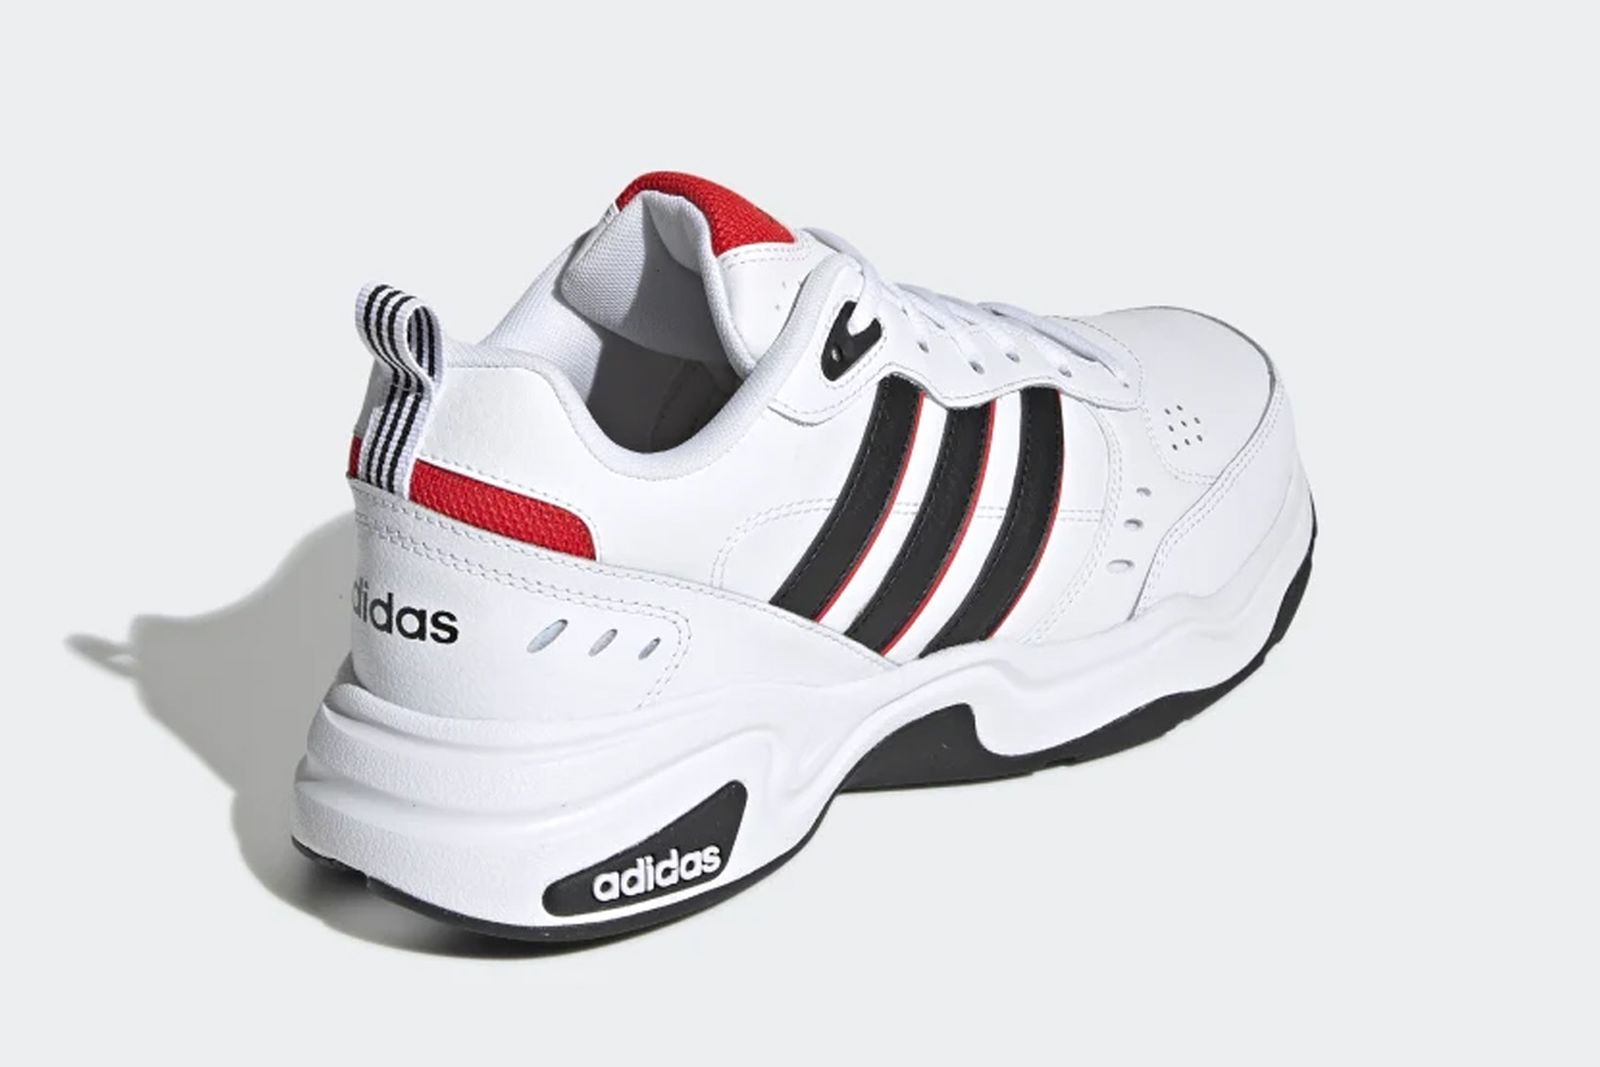 The adidas Strutter Looks Like Another Very Popular Dad Shoe رقم شركة مازدا